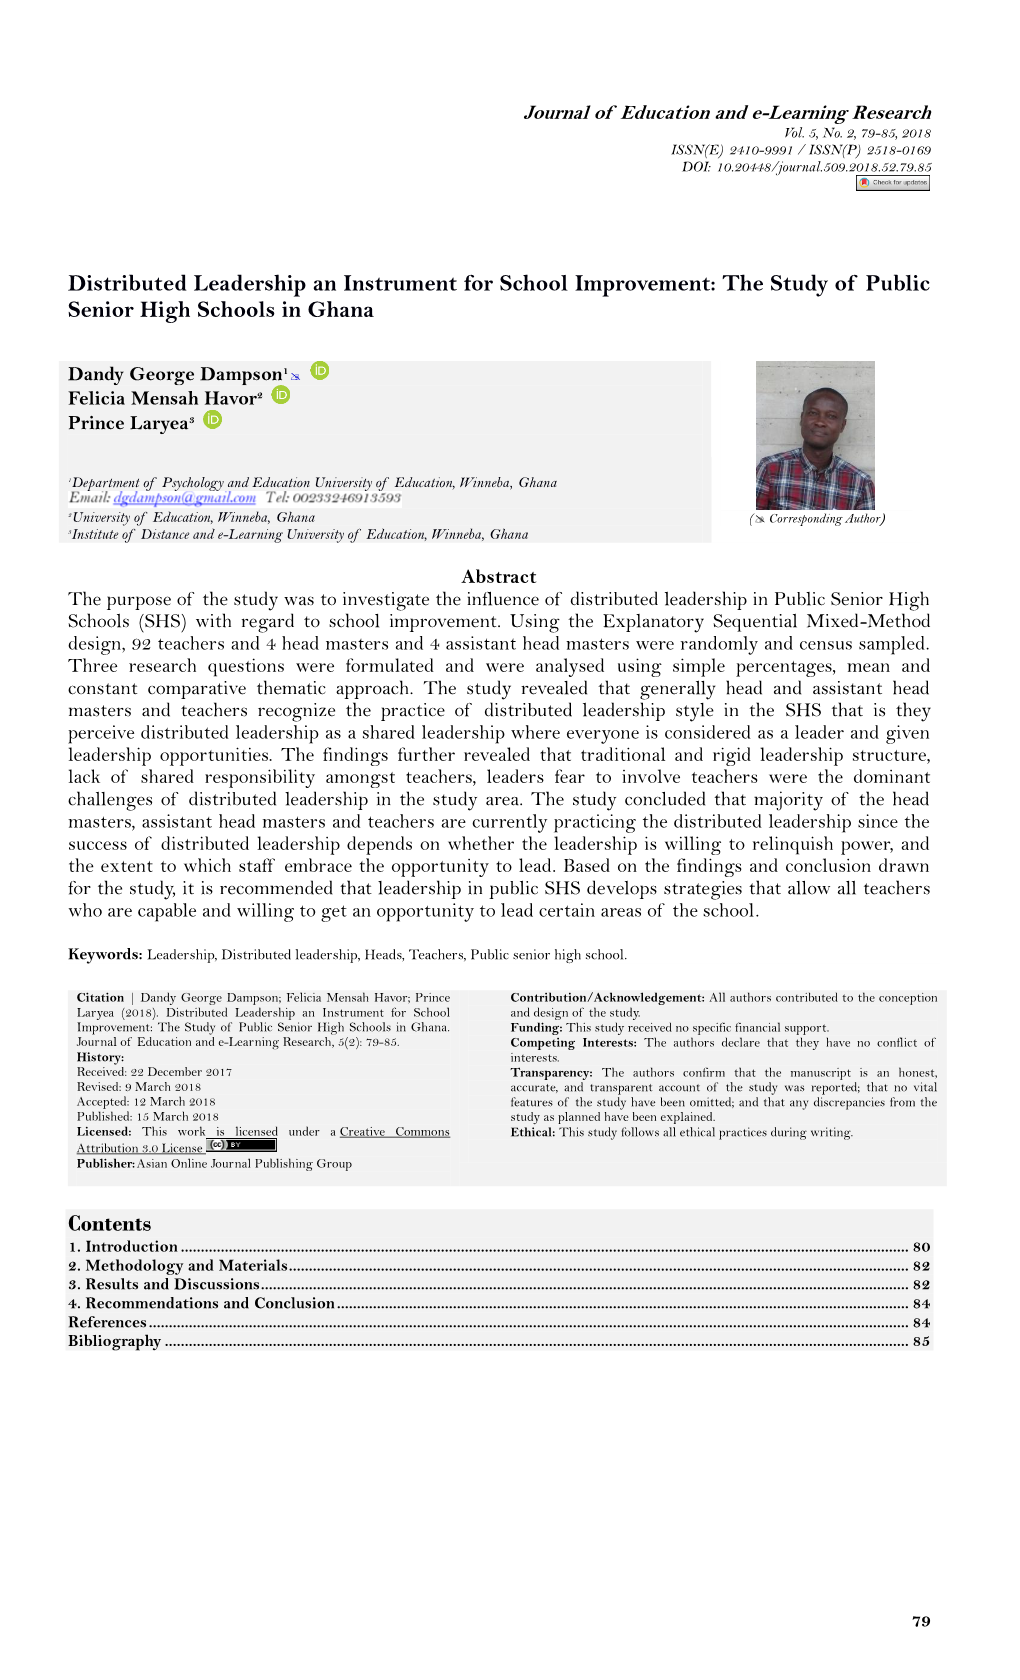 Distributed Leadership an Instrument for School Improvement: the Study of Public Senior High Schools in Ghana